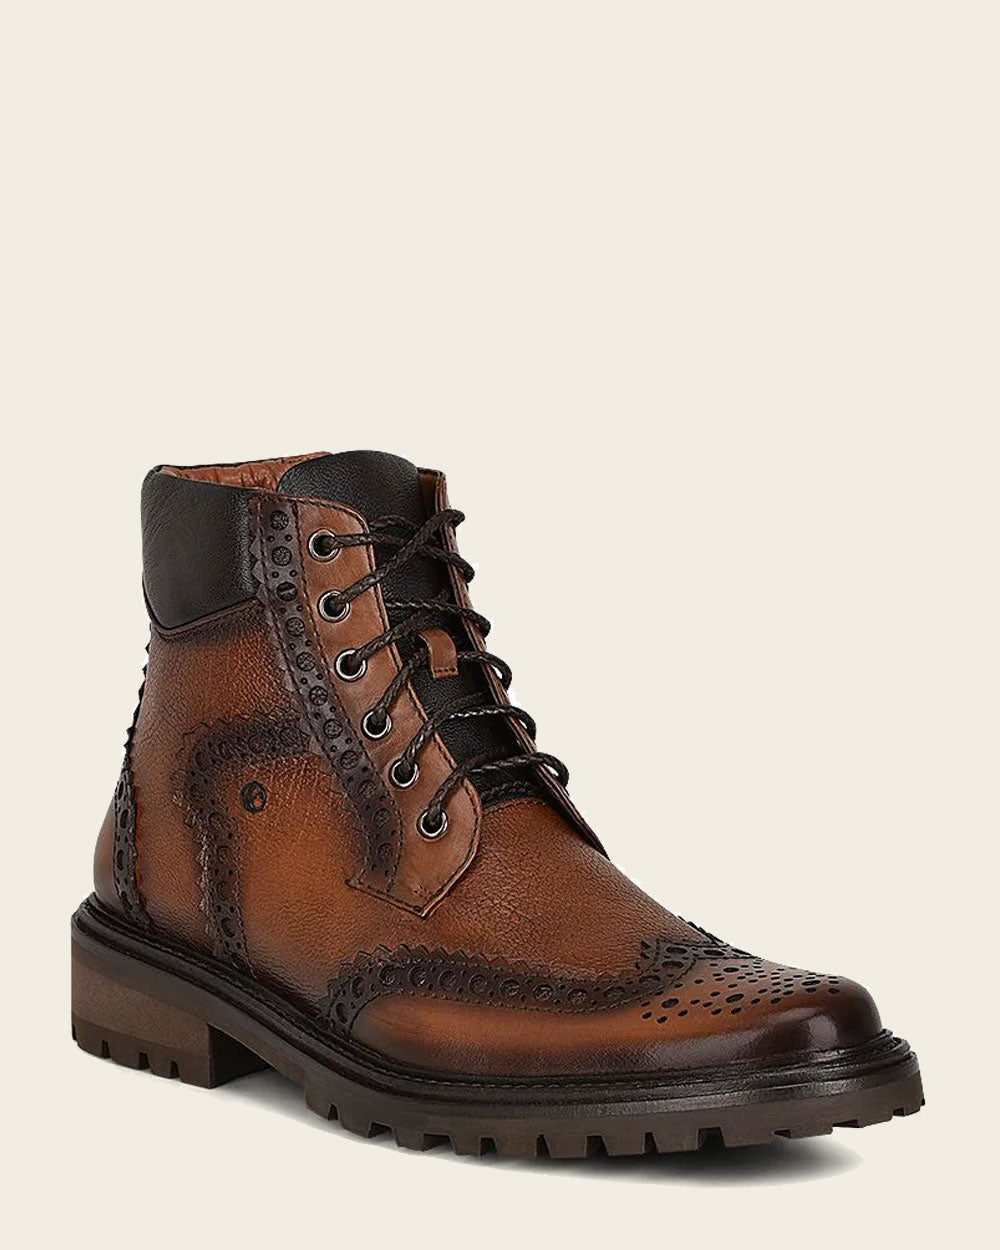 Introducing the ultimate blend of style and functionality, our men's boot crafted from premium bovine leather is a must-have addition to your footwear collection.